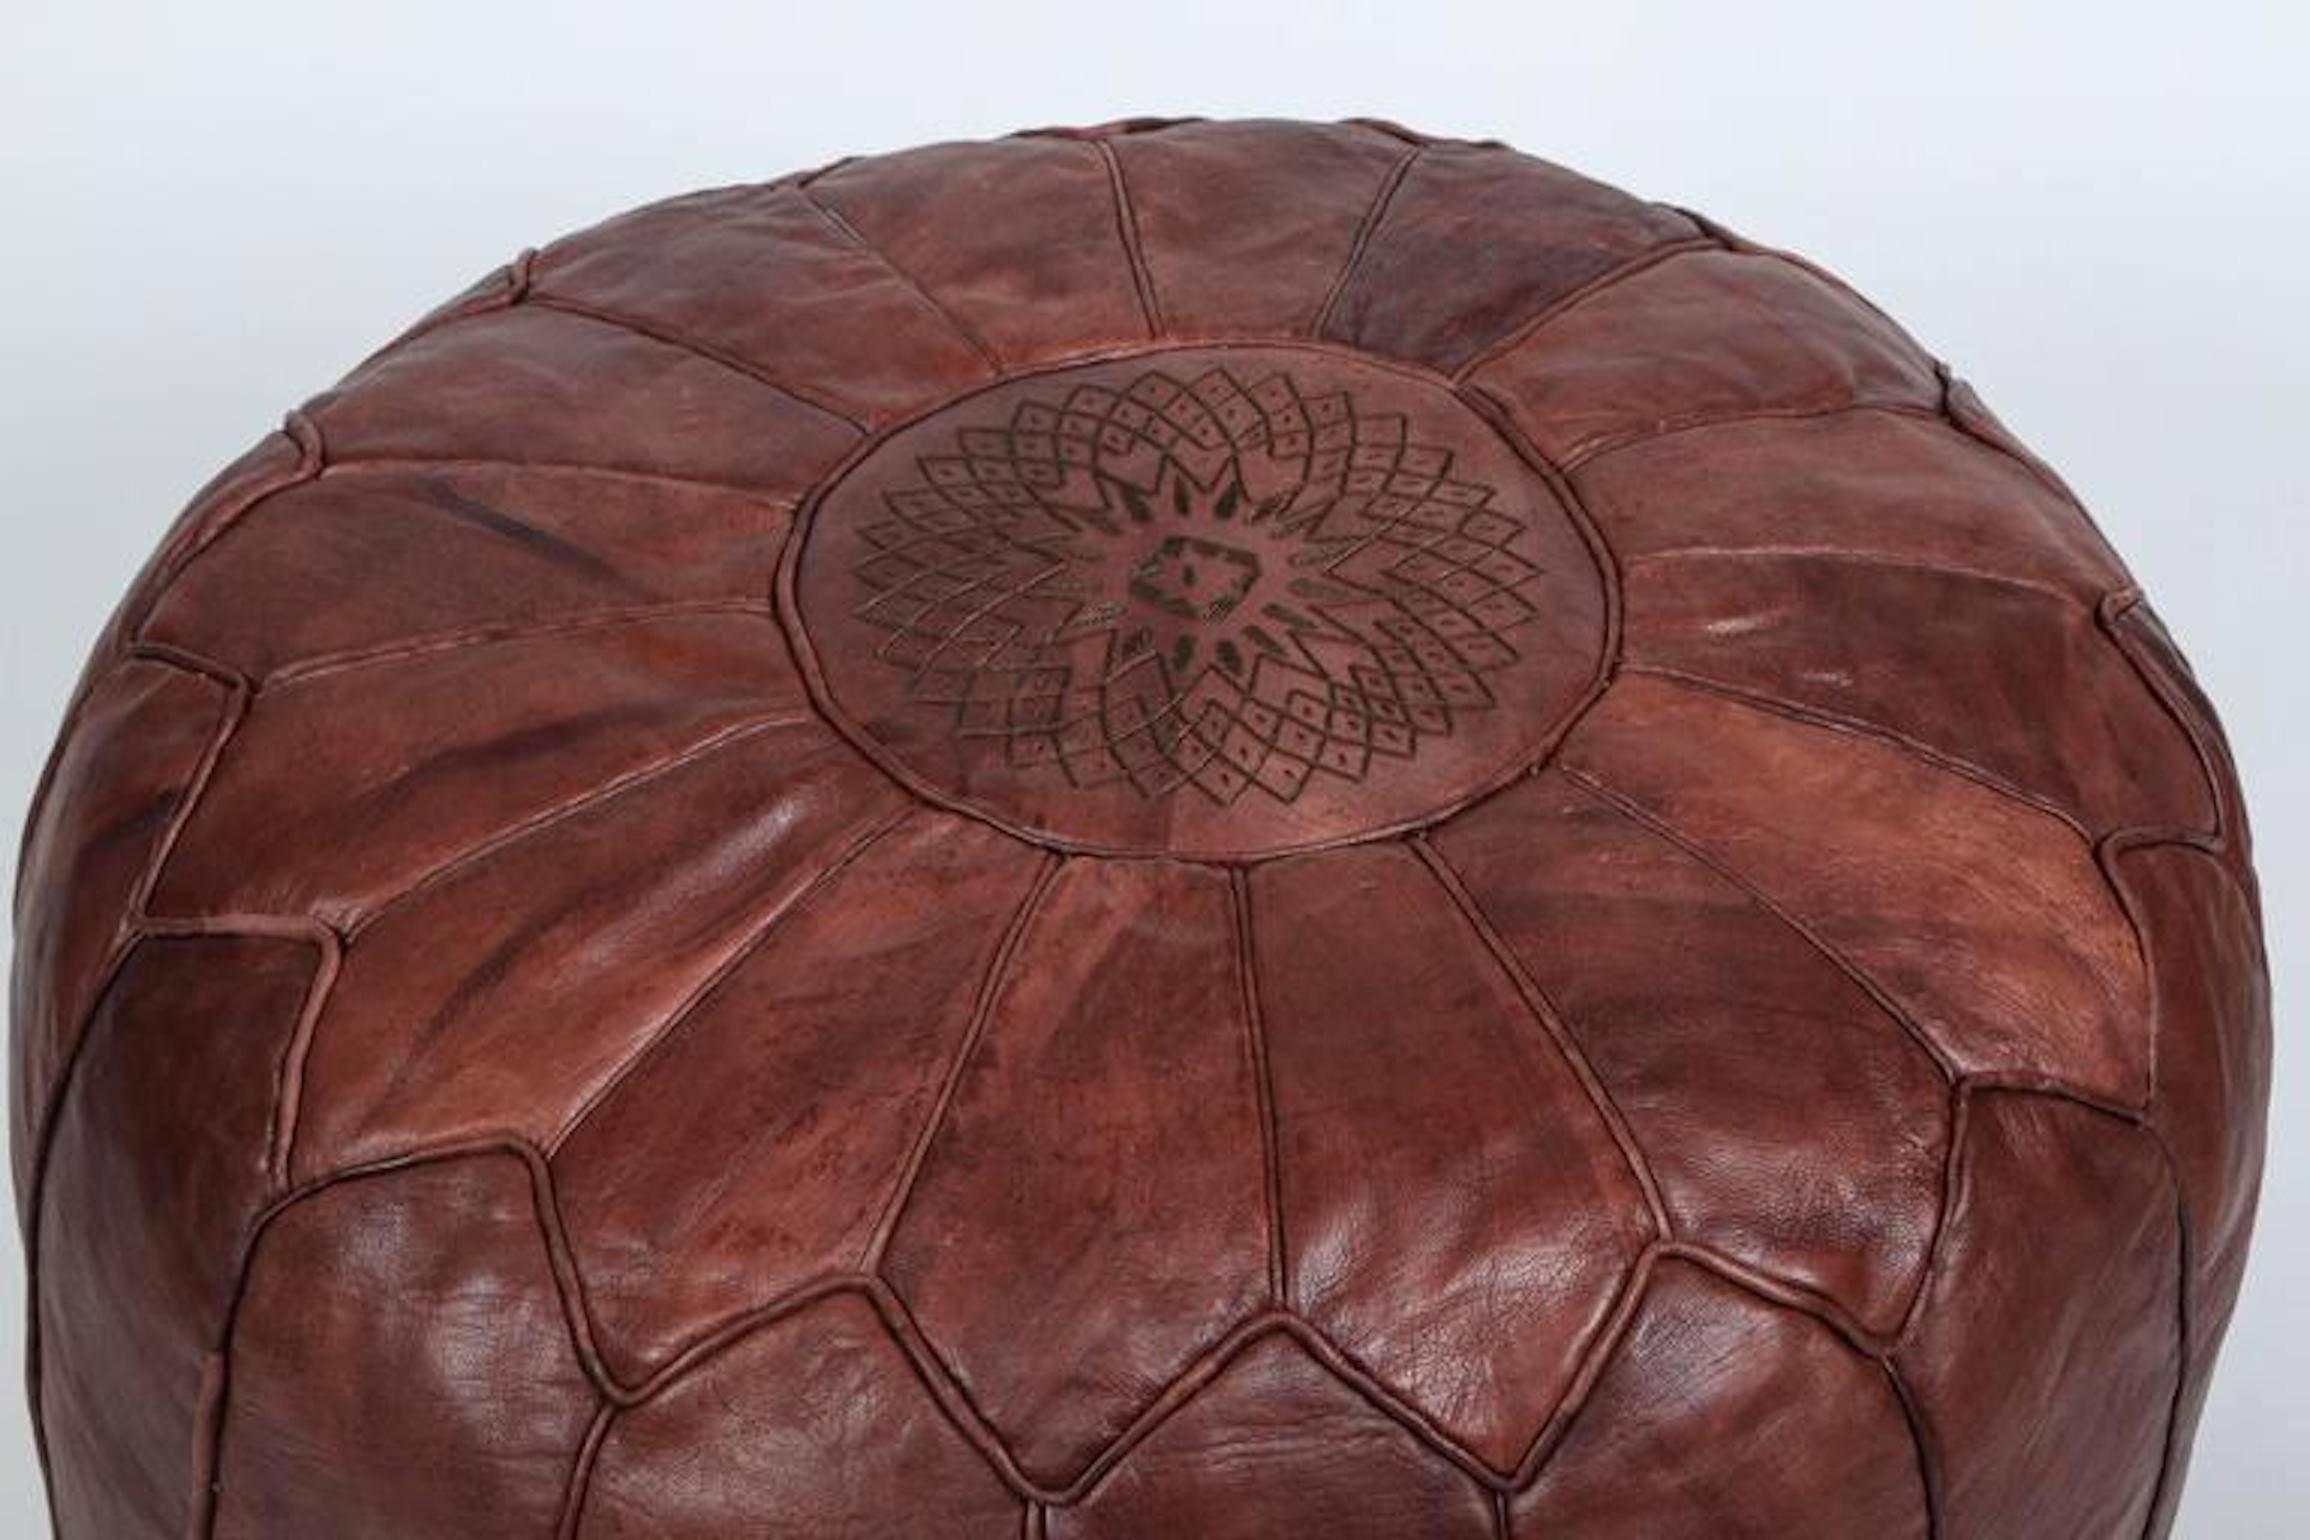 Large vintage round Moroccan leather pouf, handcrafted in chocolate brown camel leather.
Hand tooled and embroidered on the top with the Moorish star by Moroccan artisans in Marrakech.

 